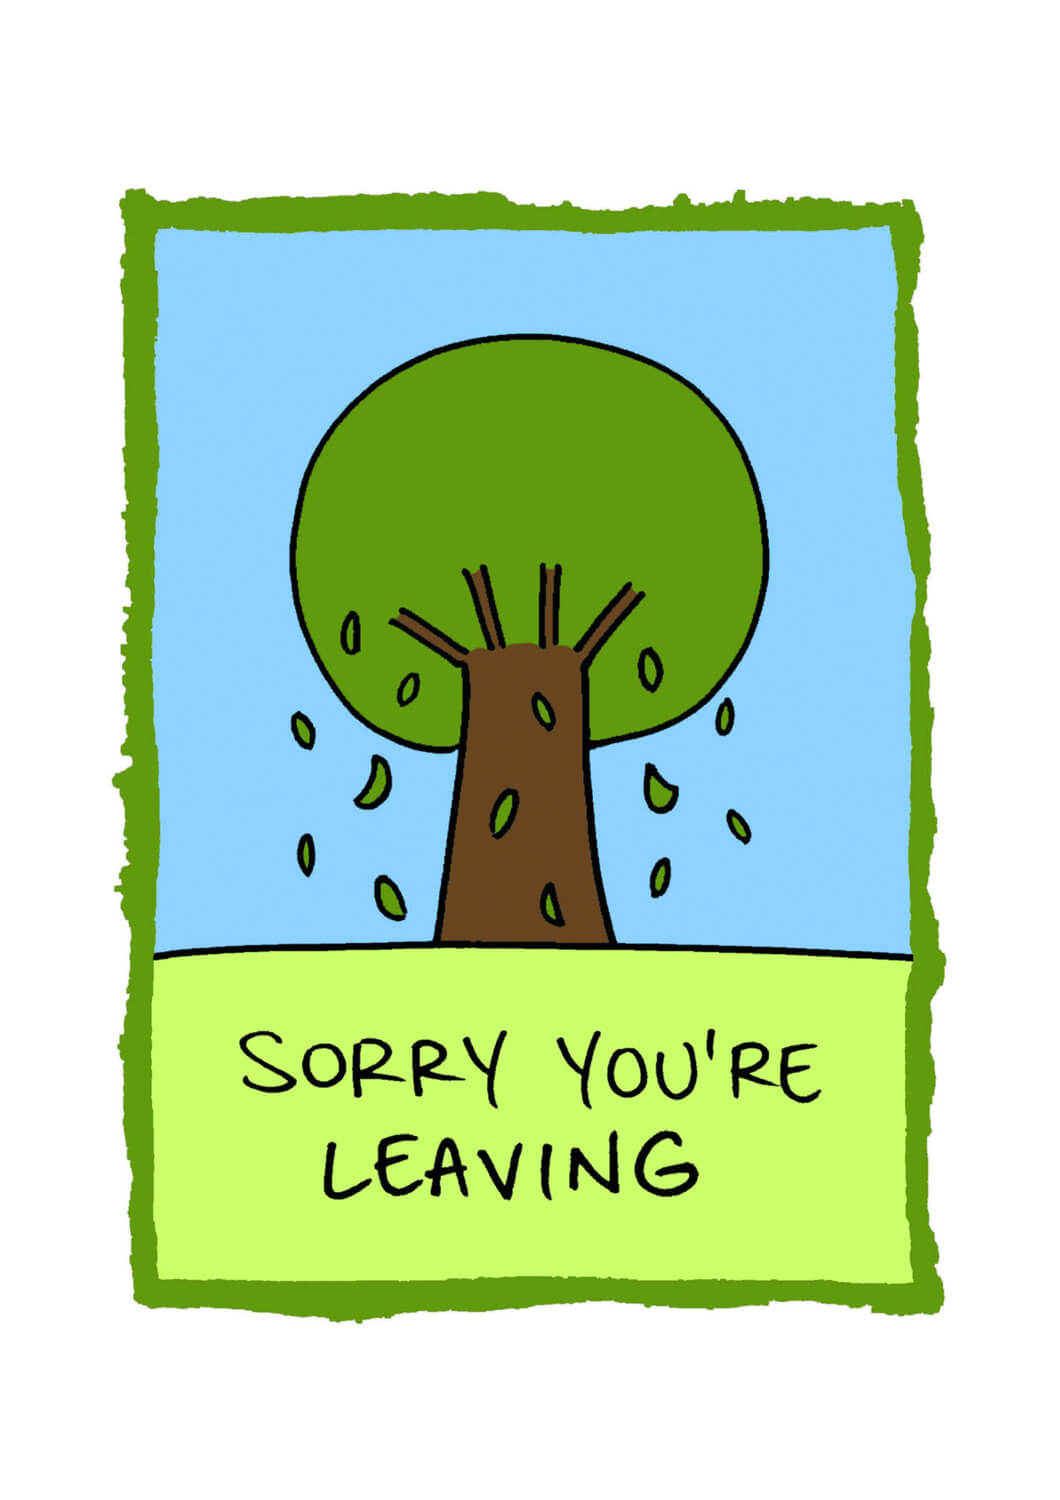 28+ [ Sorry You Re Leaving Card Template ] | Sorry You Re In Sorry You Re Leaving Card Template